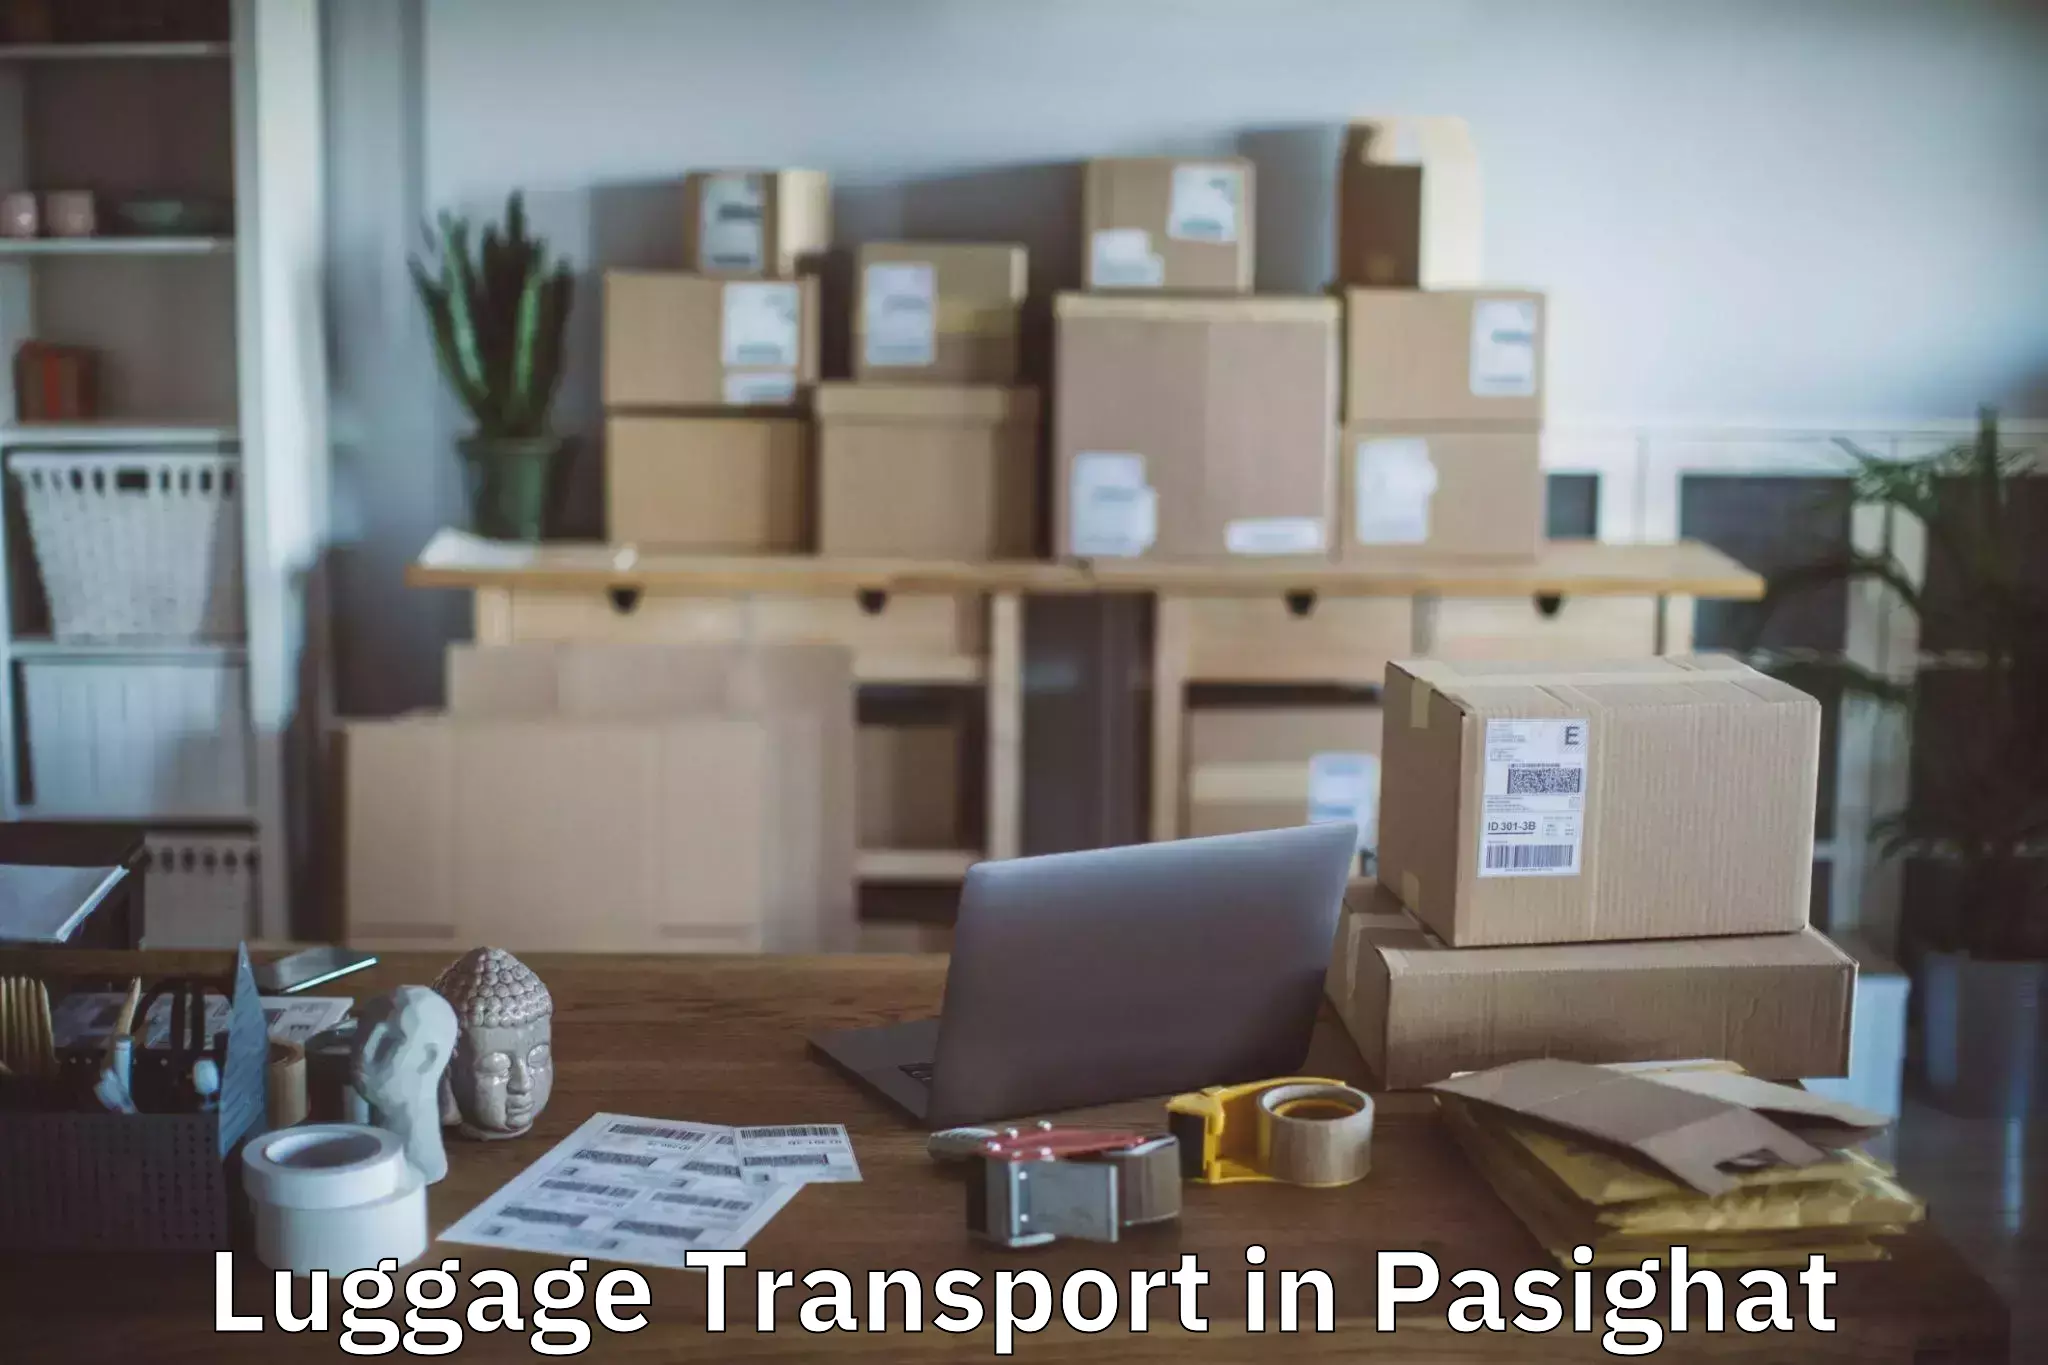 Baggage transport services in Pasighat